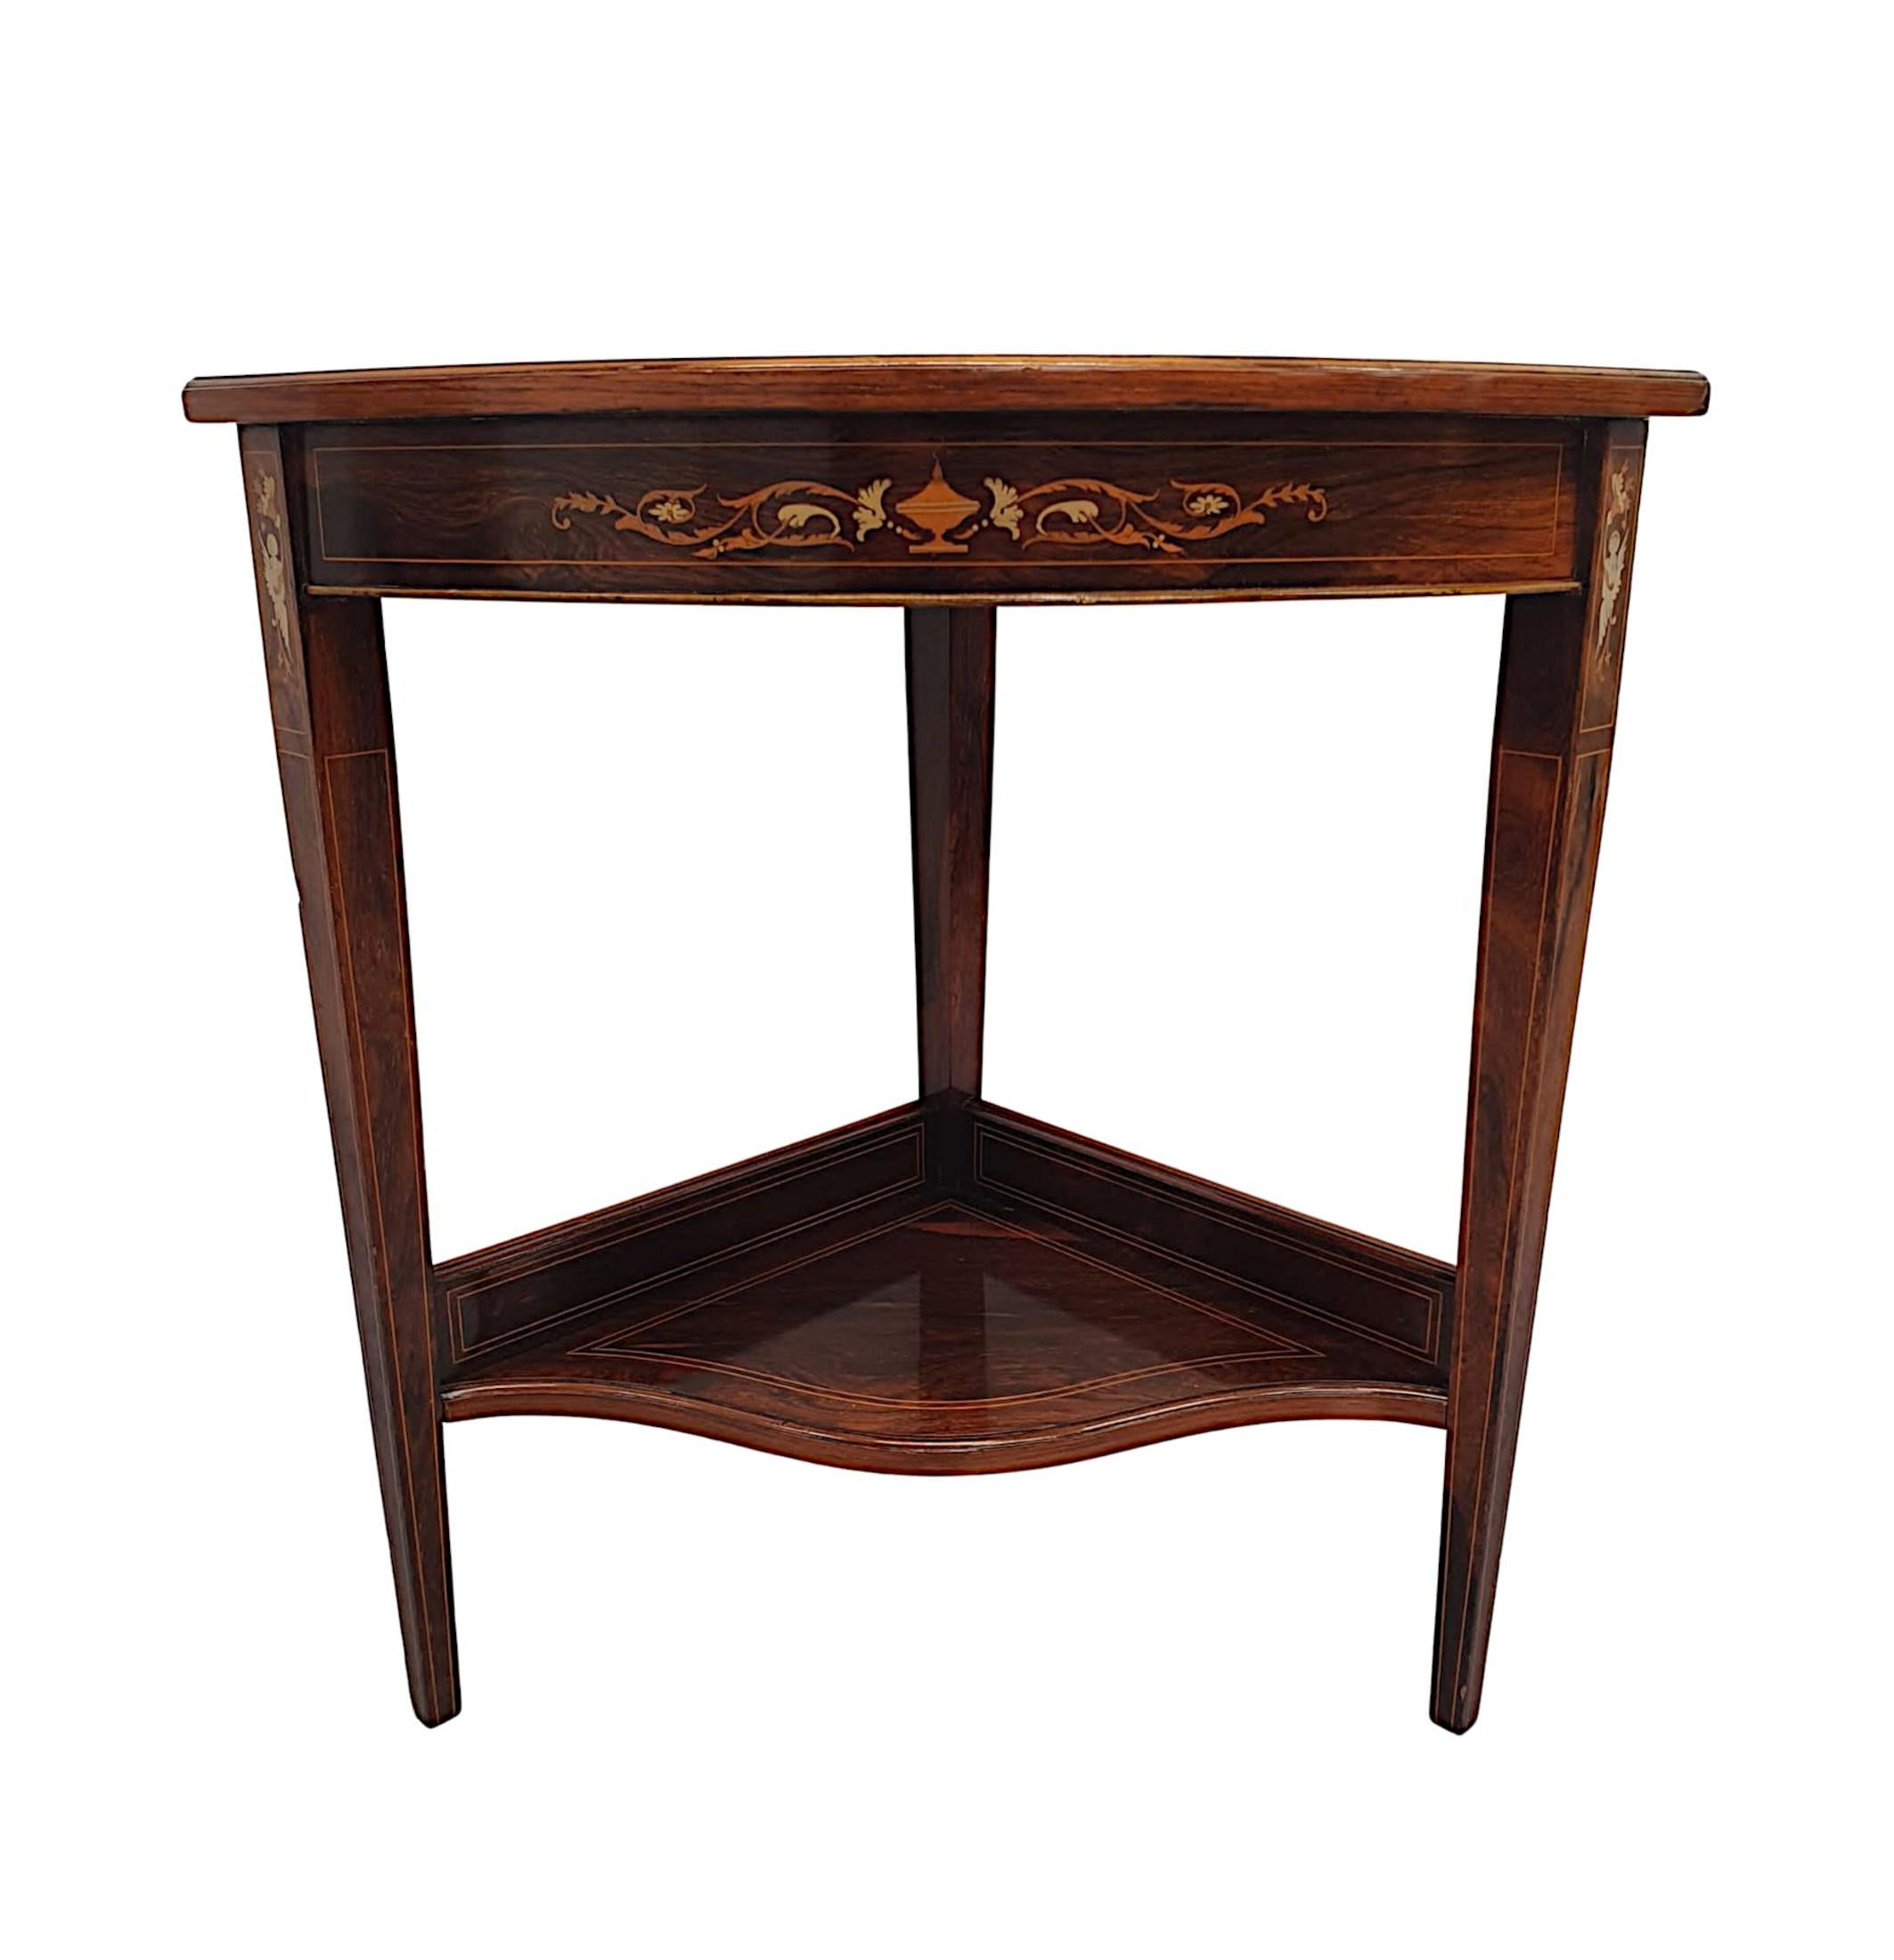 Gorgeous Edwardian Line Inlaid Marquetry Corner Table In Good Condition For Sale In Dublin, IE